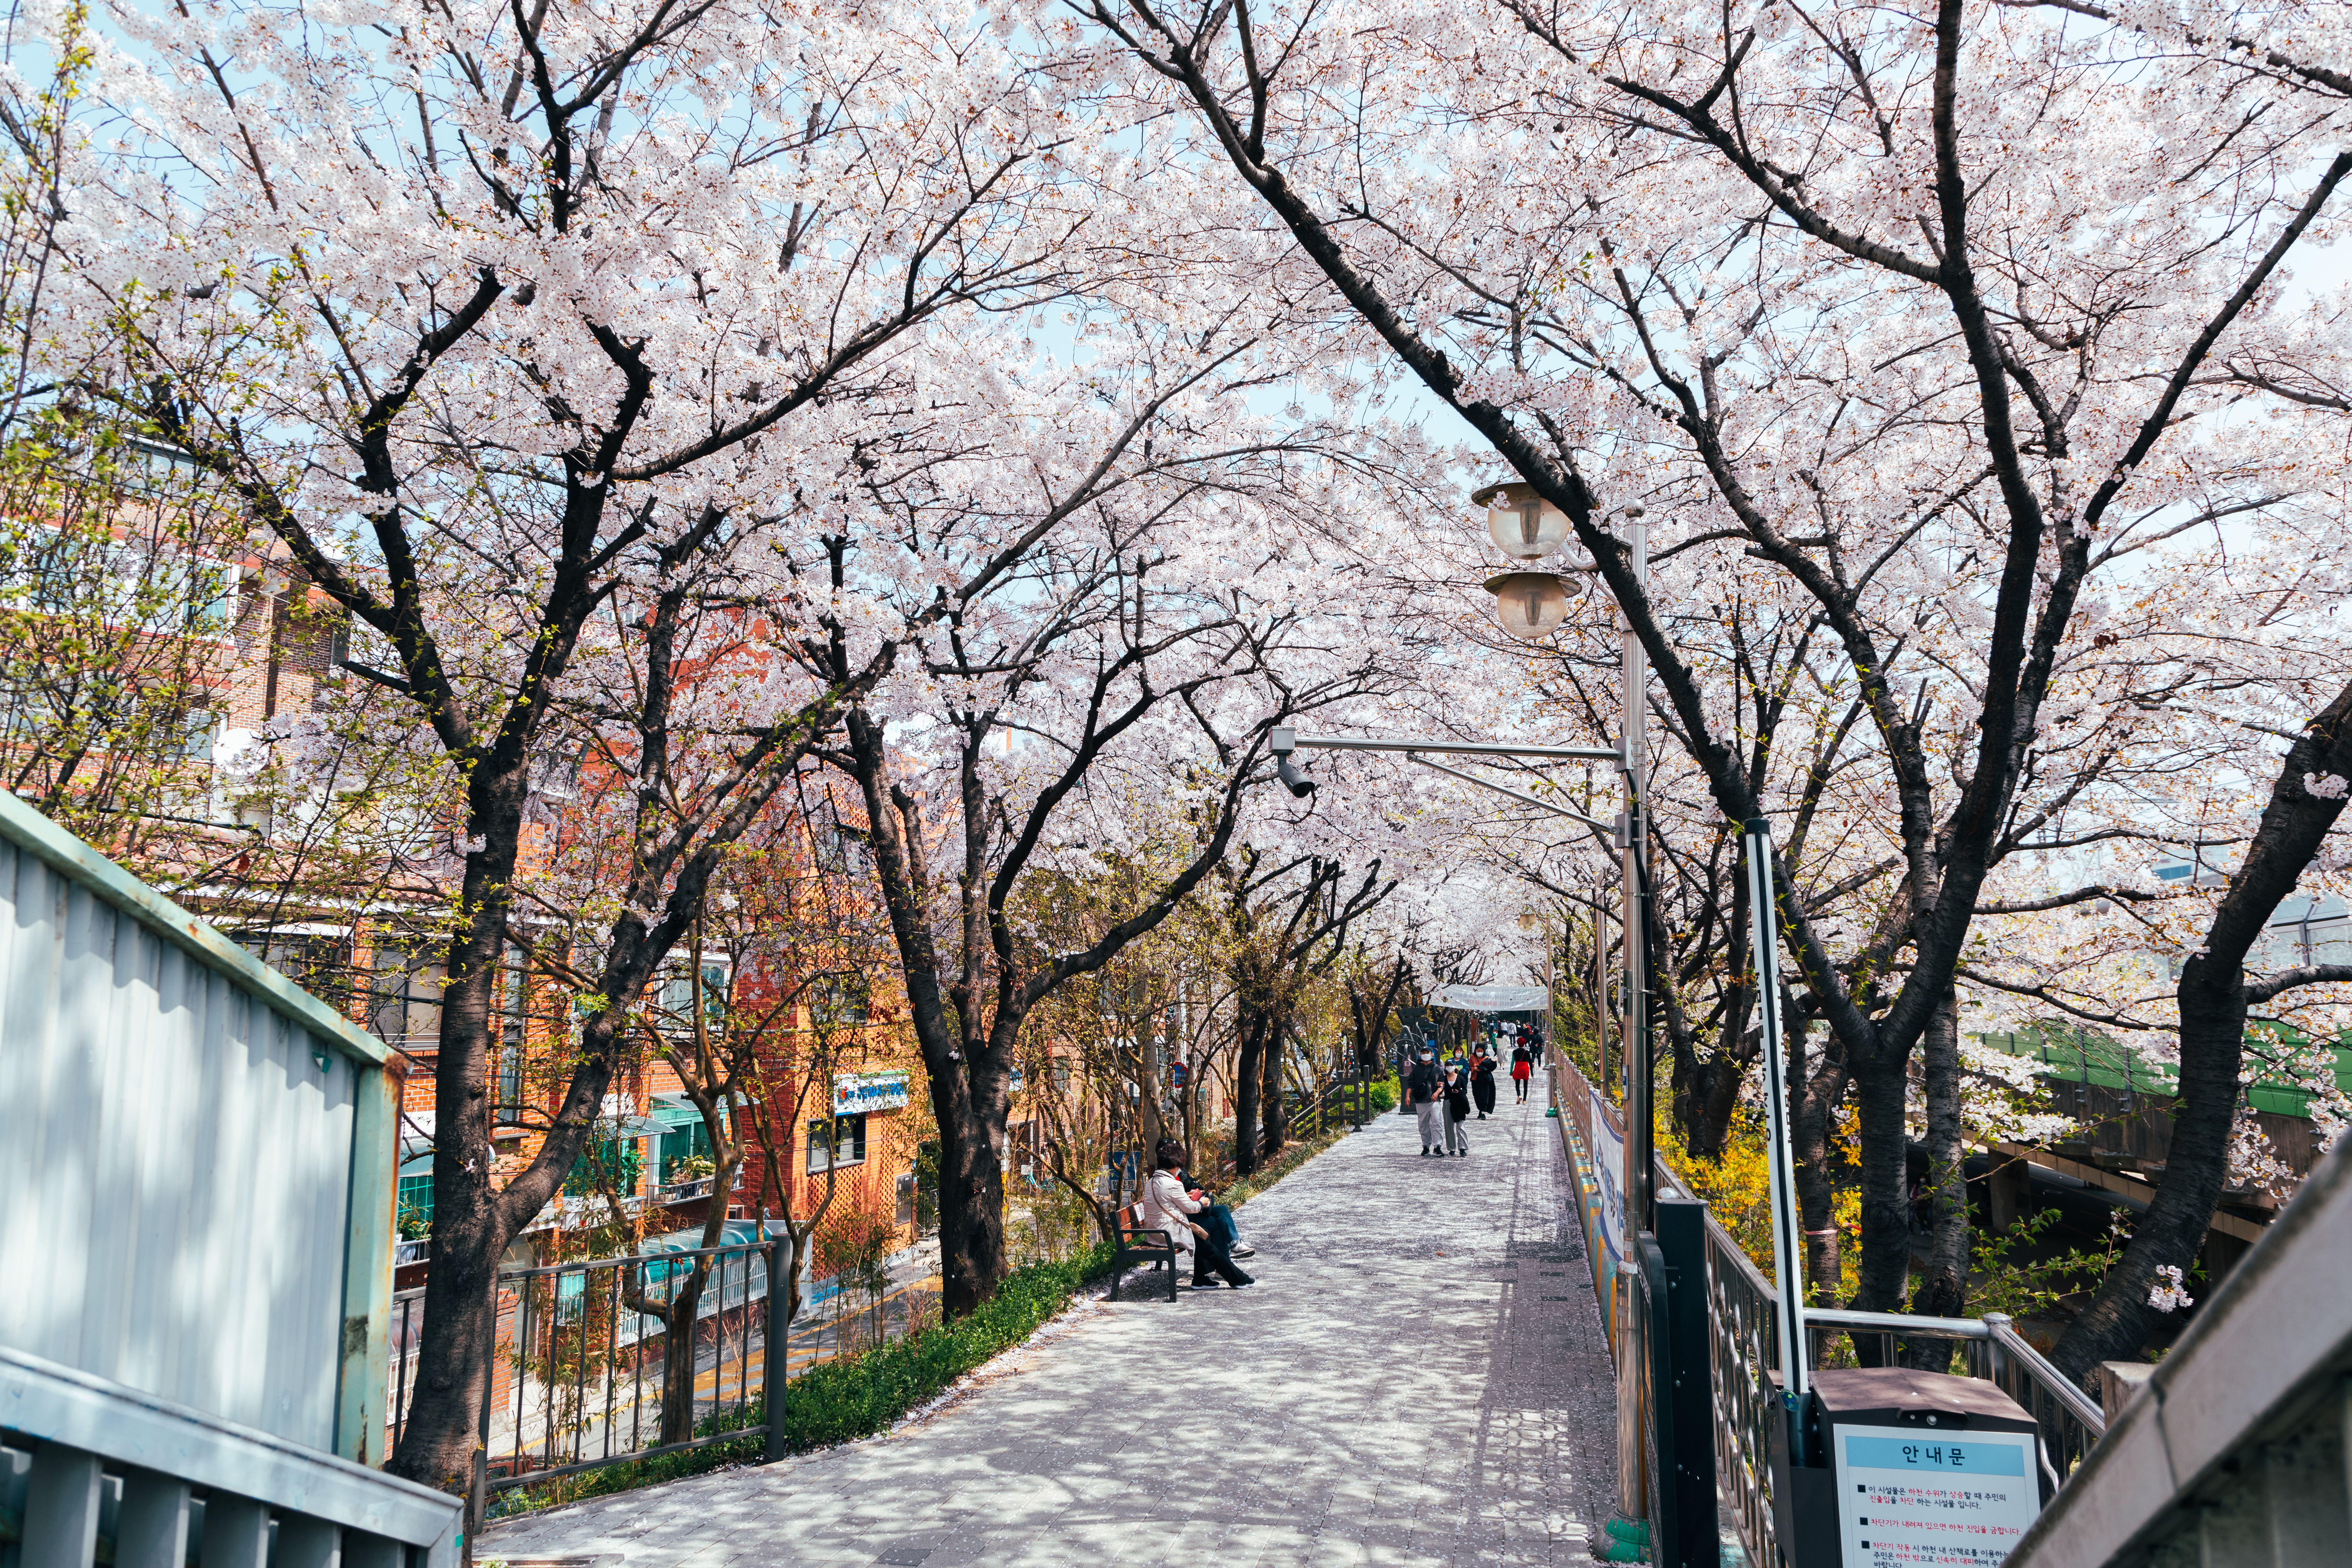 Cherry blossoms in Seoul South Korea